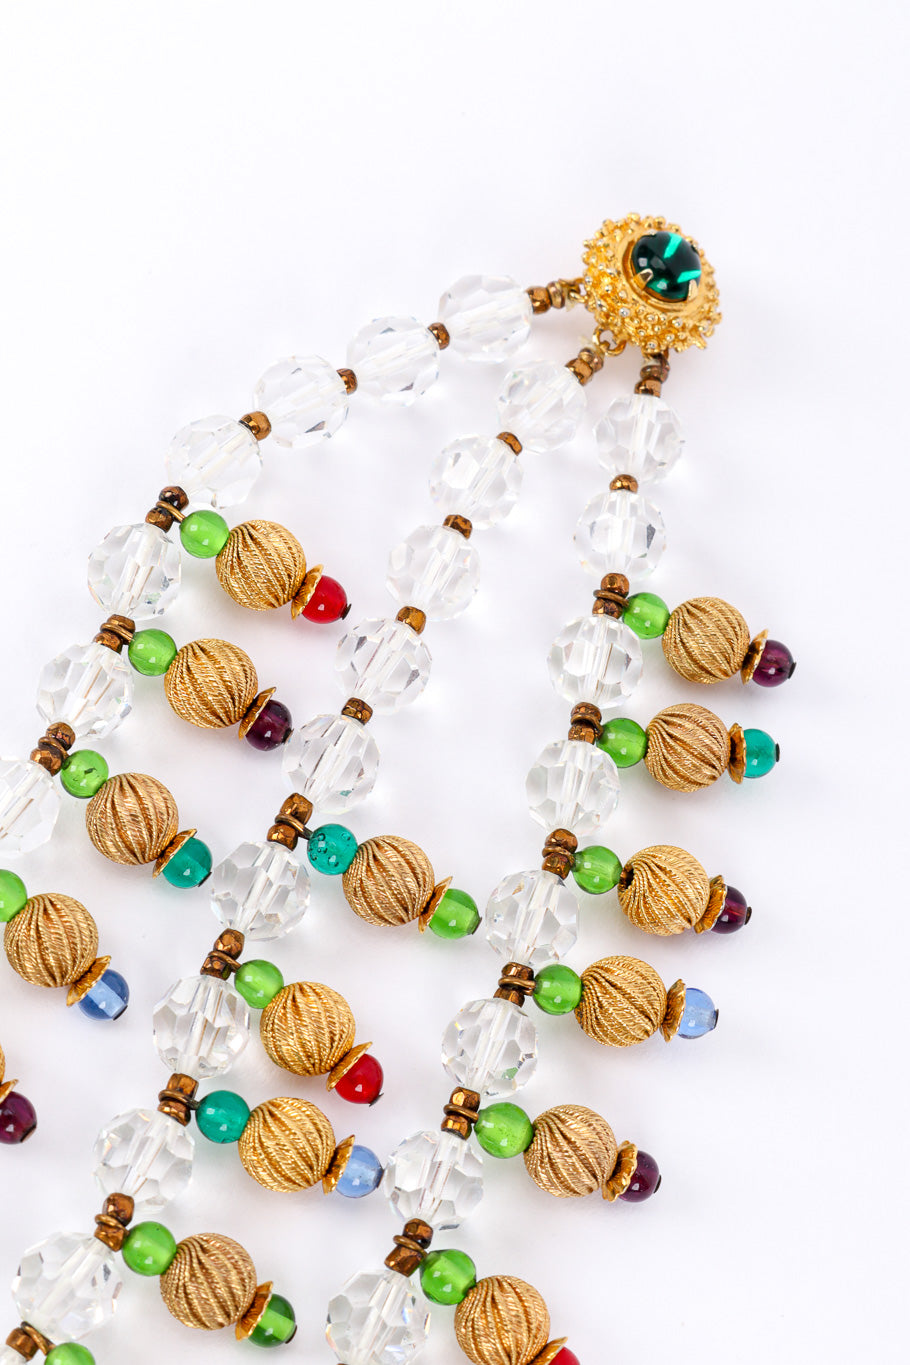 Vintage 3-Strand Beaded Necklace end clasp closeup on a white backdrop @Recessla